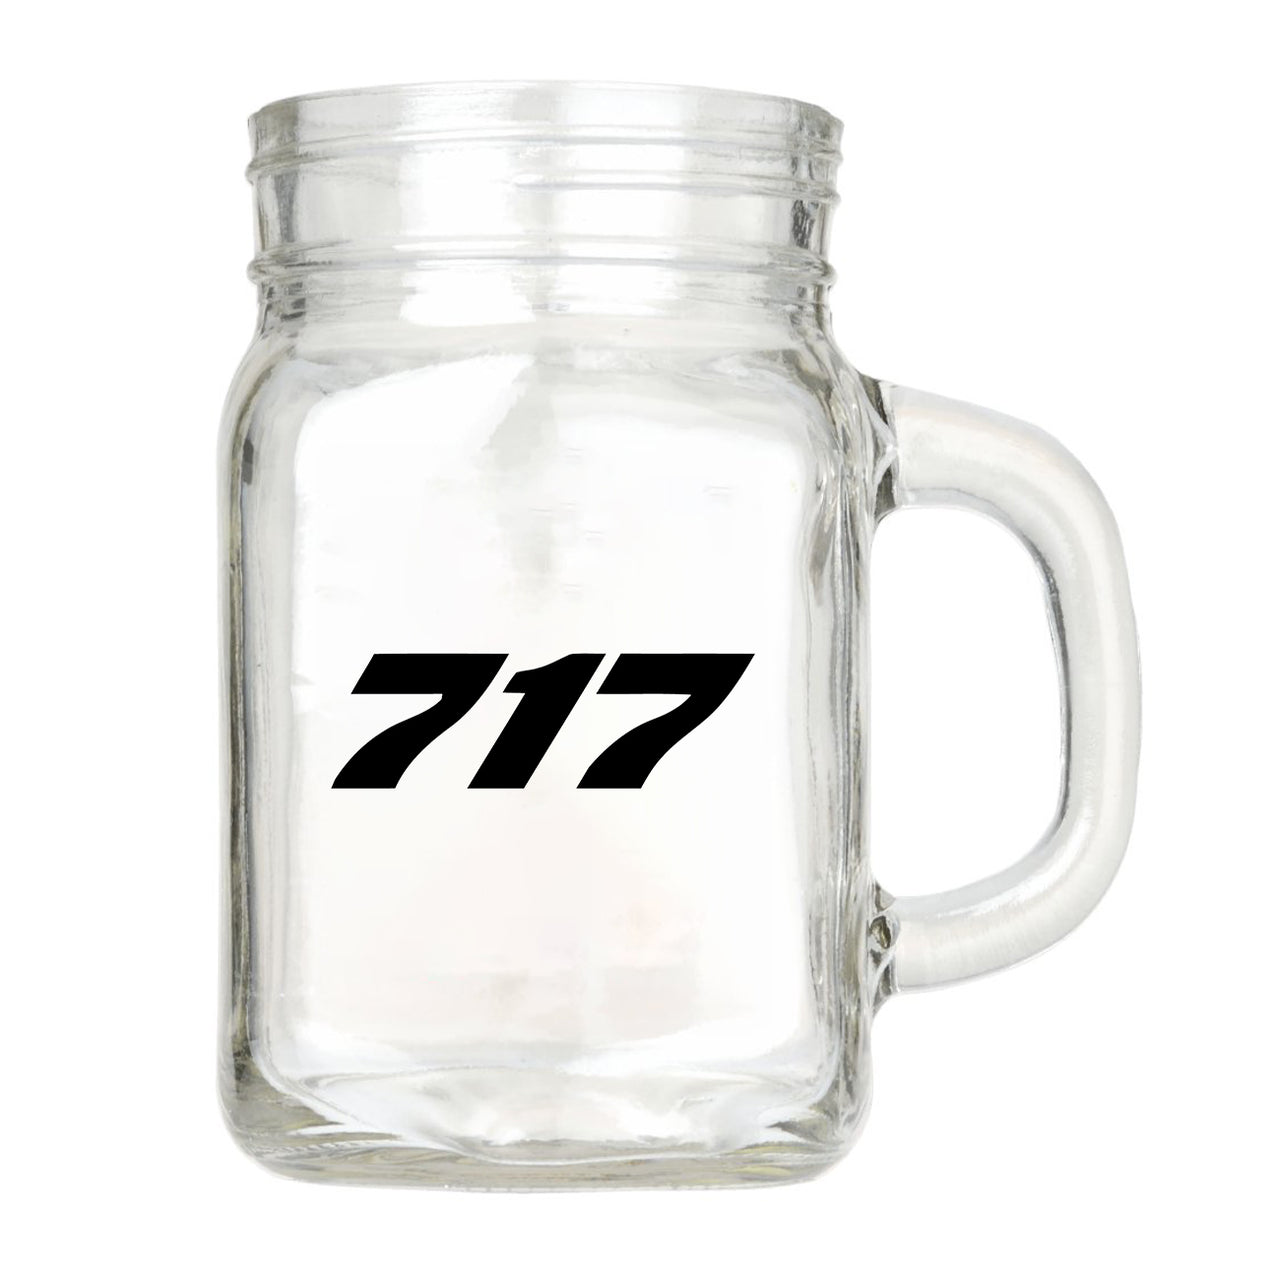 717 Flat Text Designed Cocktail Glasses